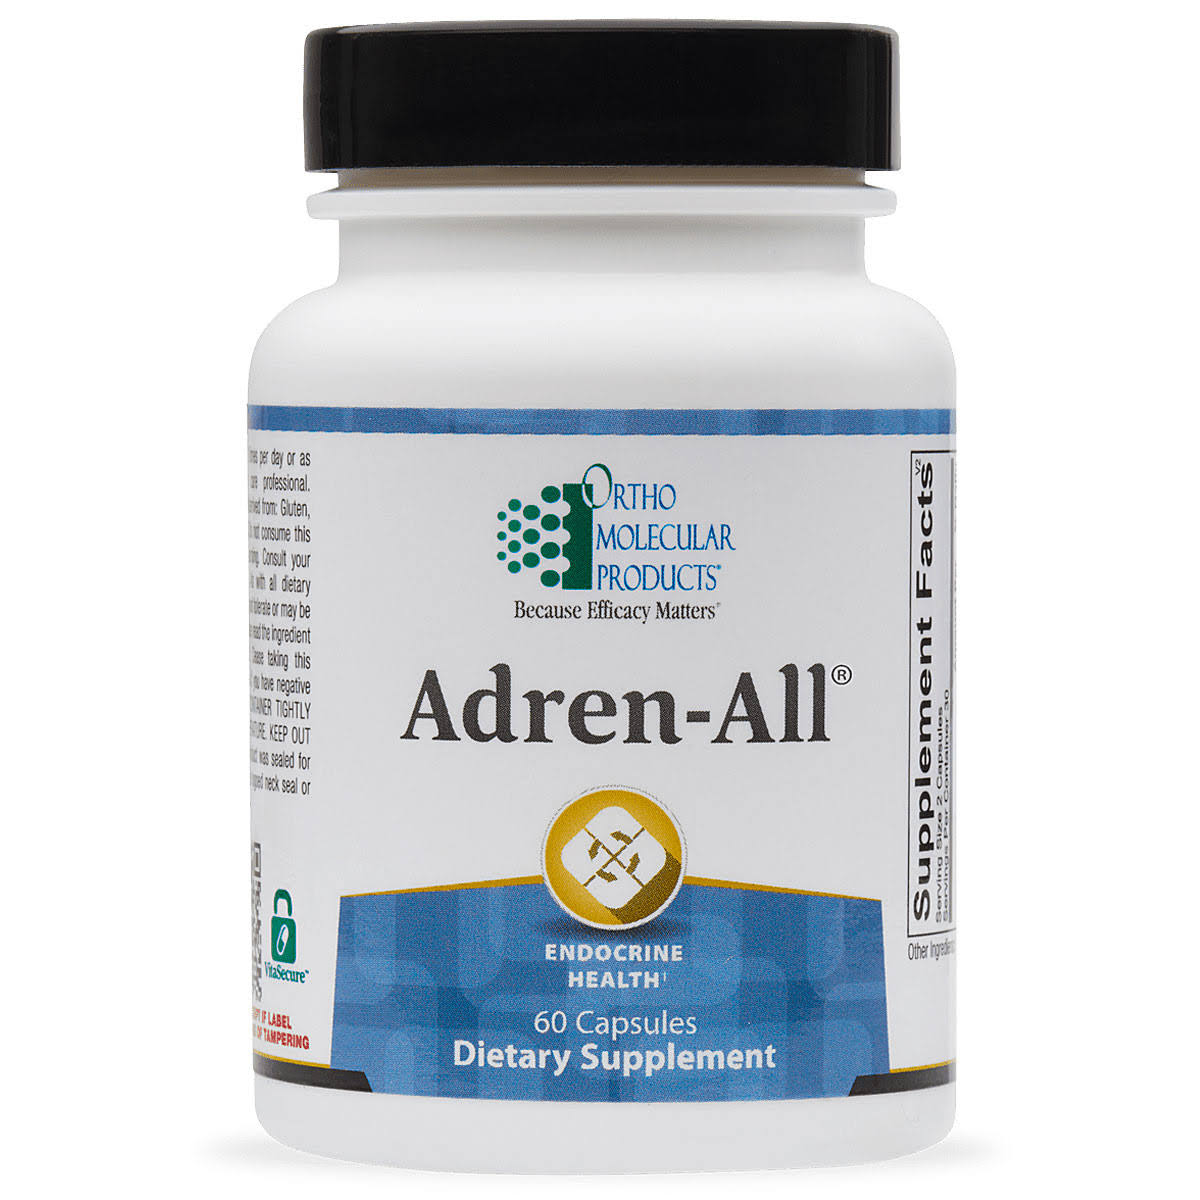 Ortho Molecular Products - Adren-All (60 Capsules)